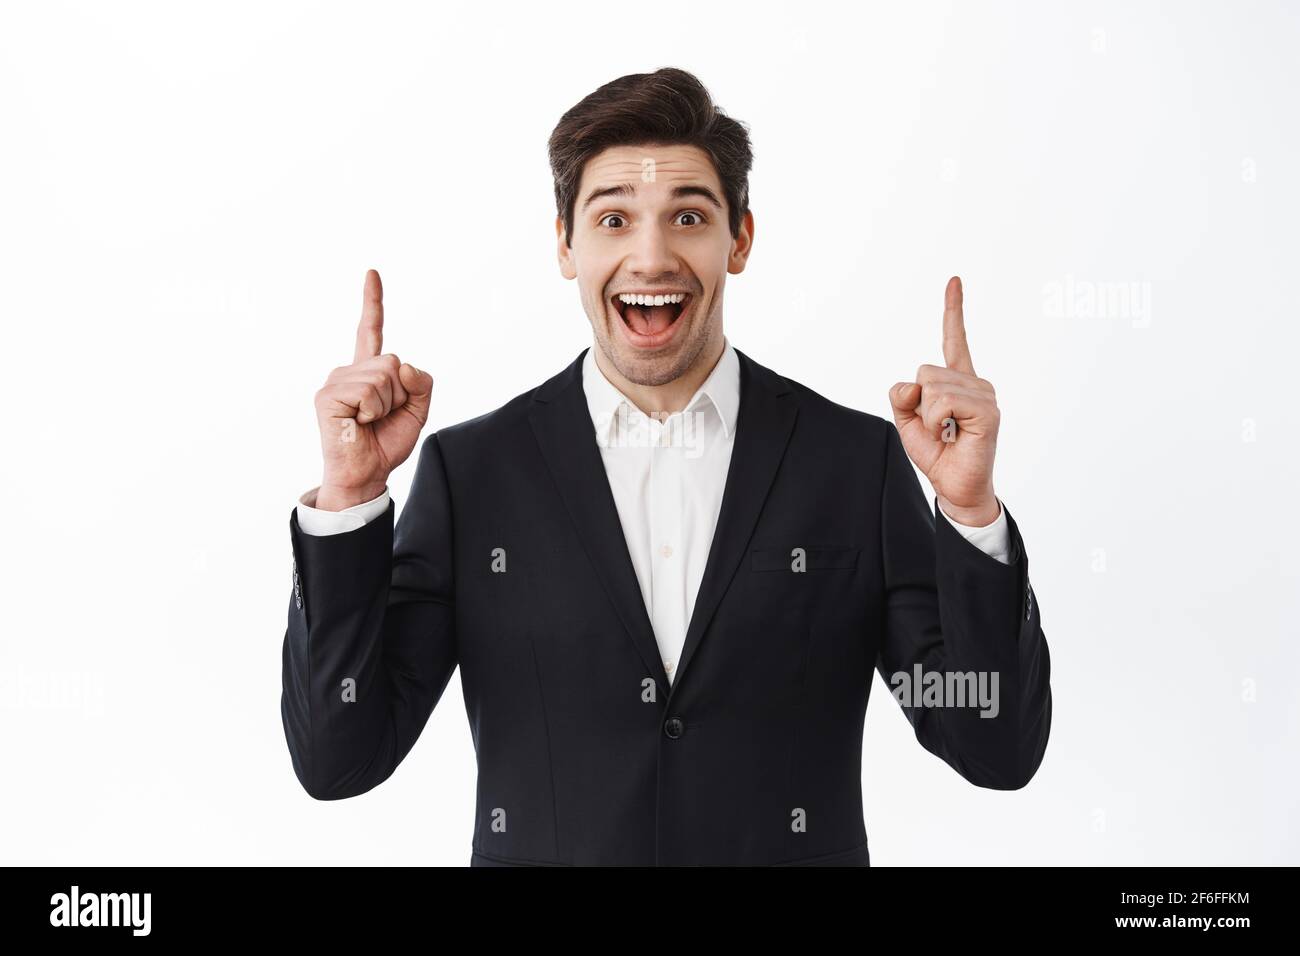 Cheerful male estate agent, broker in suit pointing fingers up, showing amazing offer, best promo sale, smiling amused, standing over white background Stock Photo